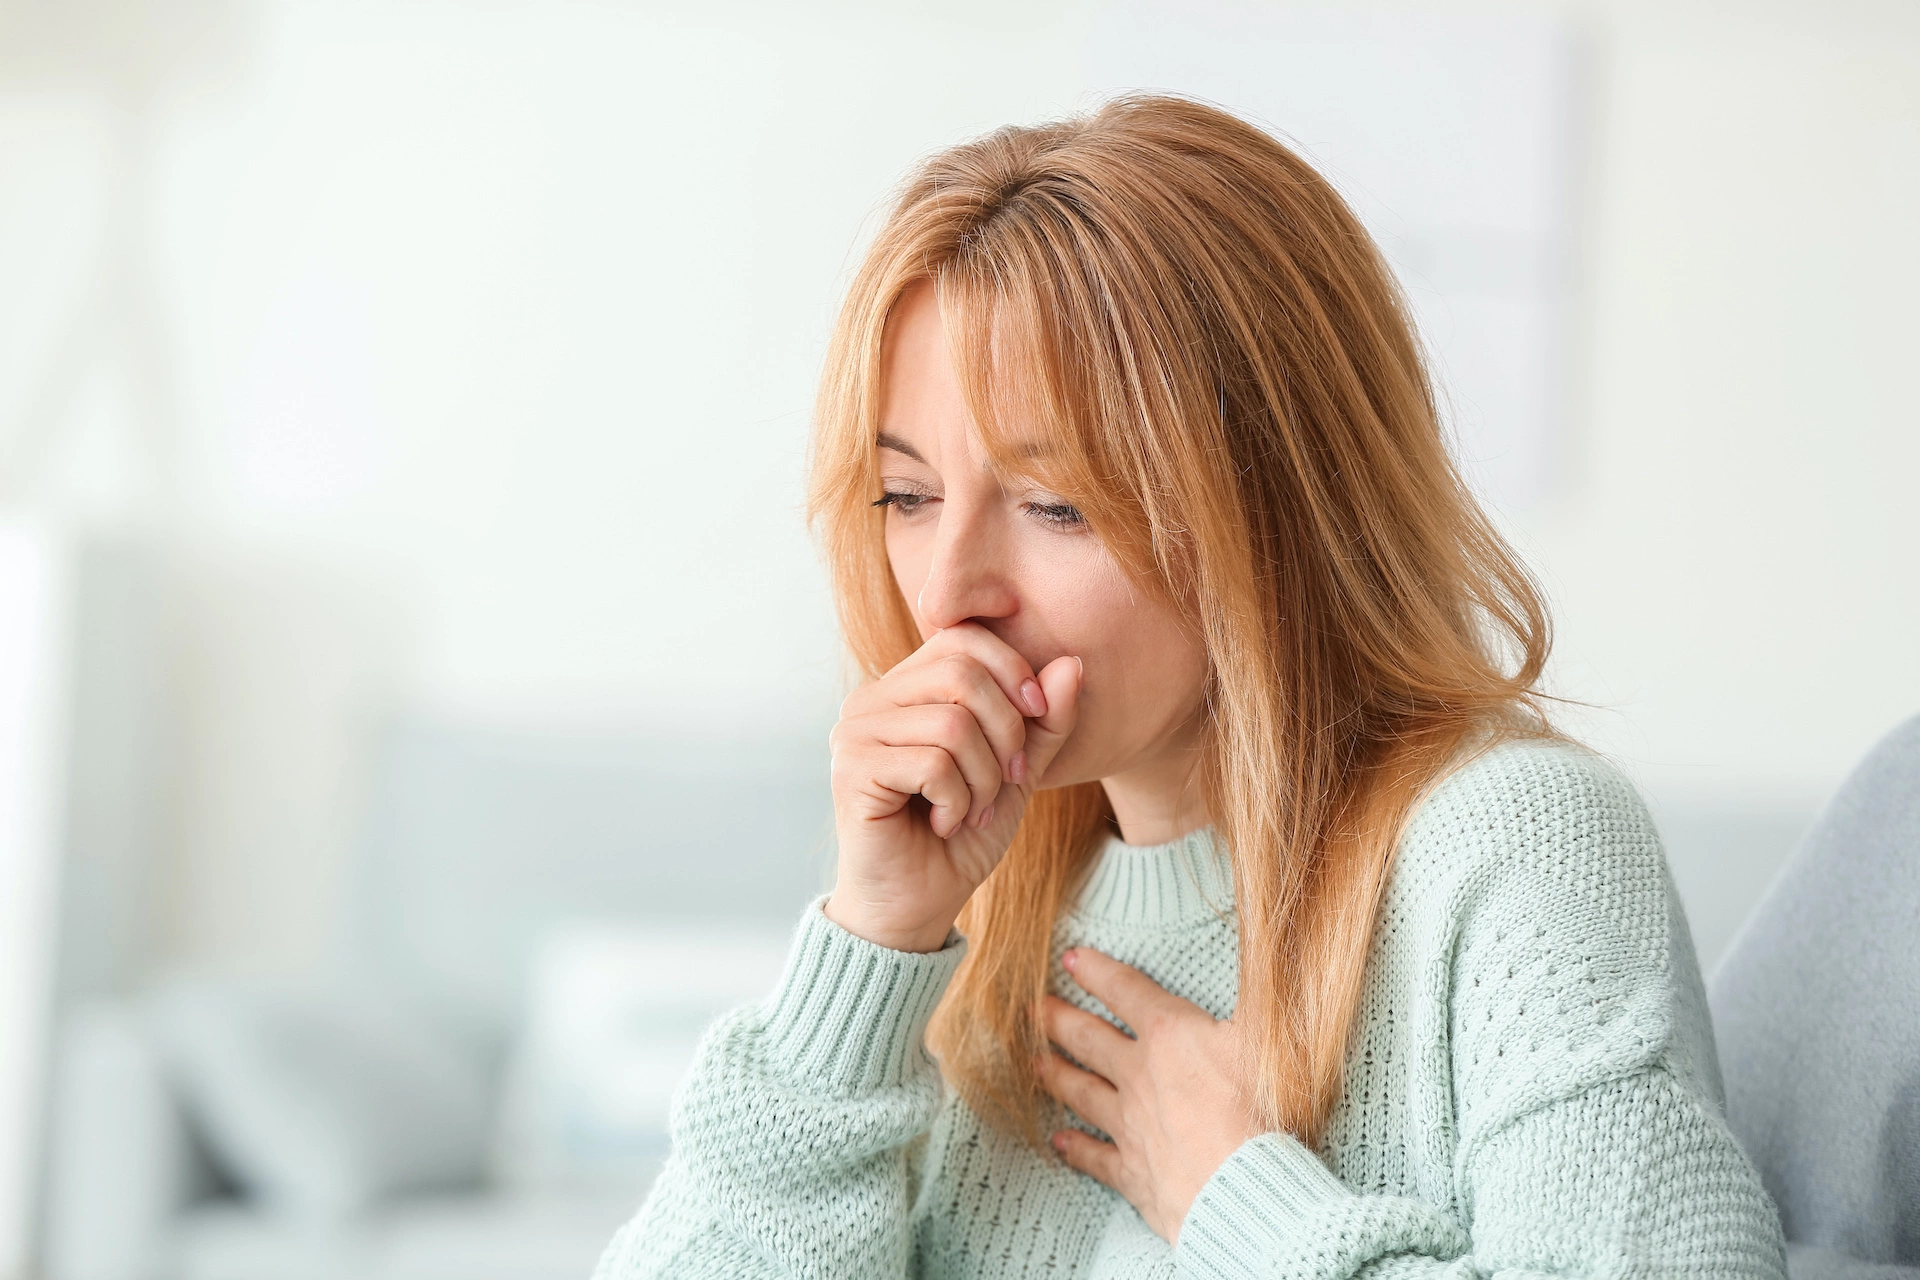 When is a cough more than just a cough?